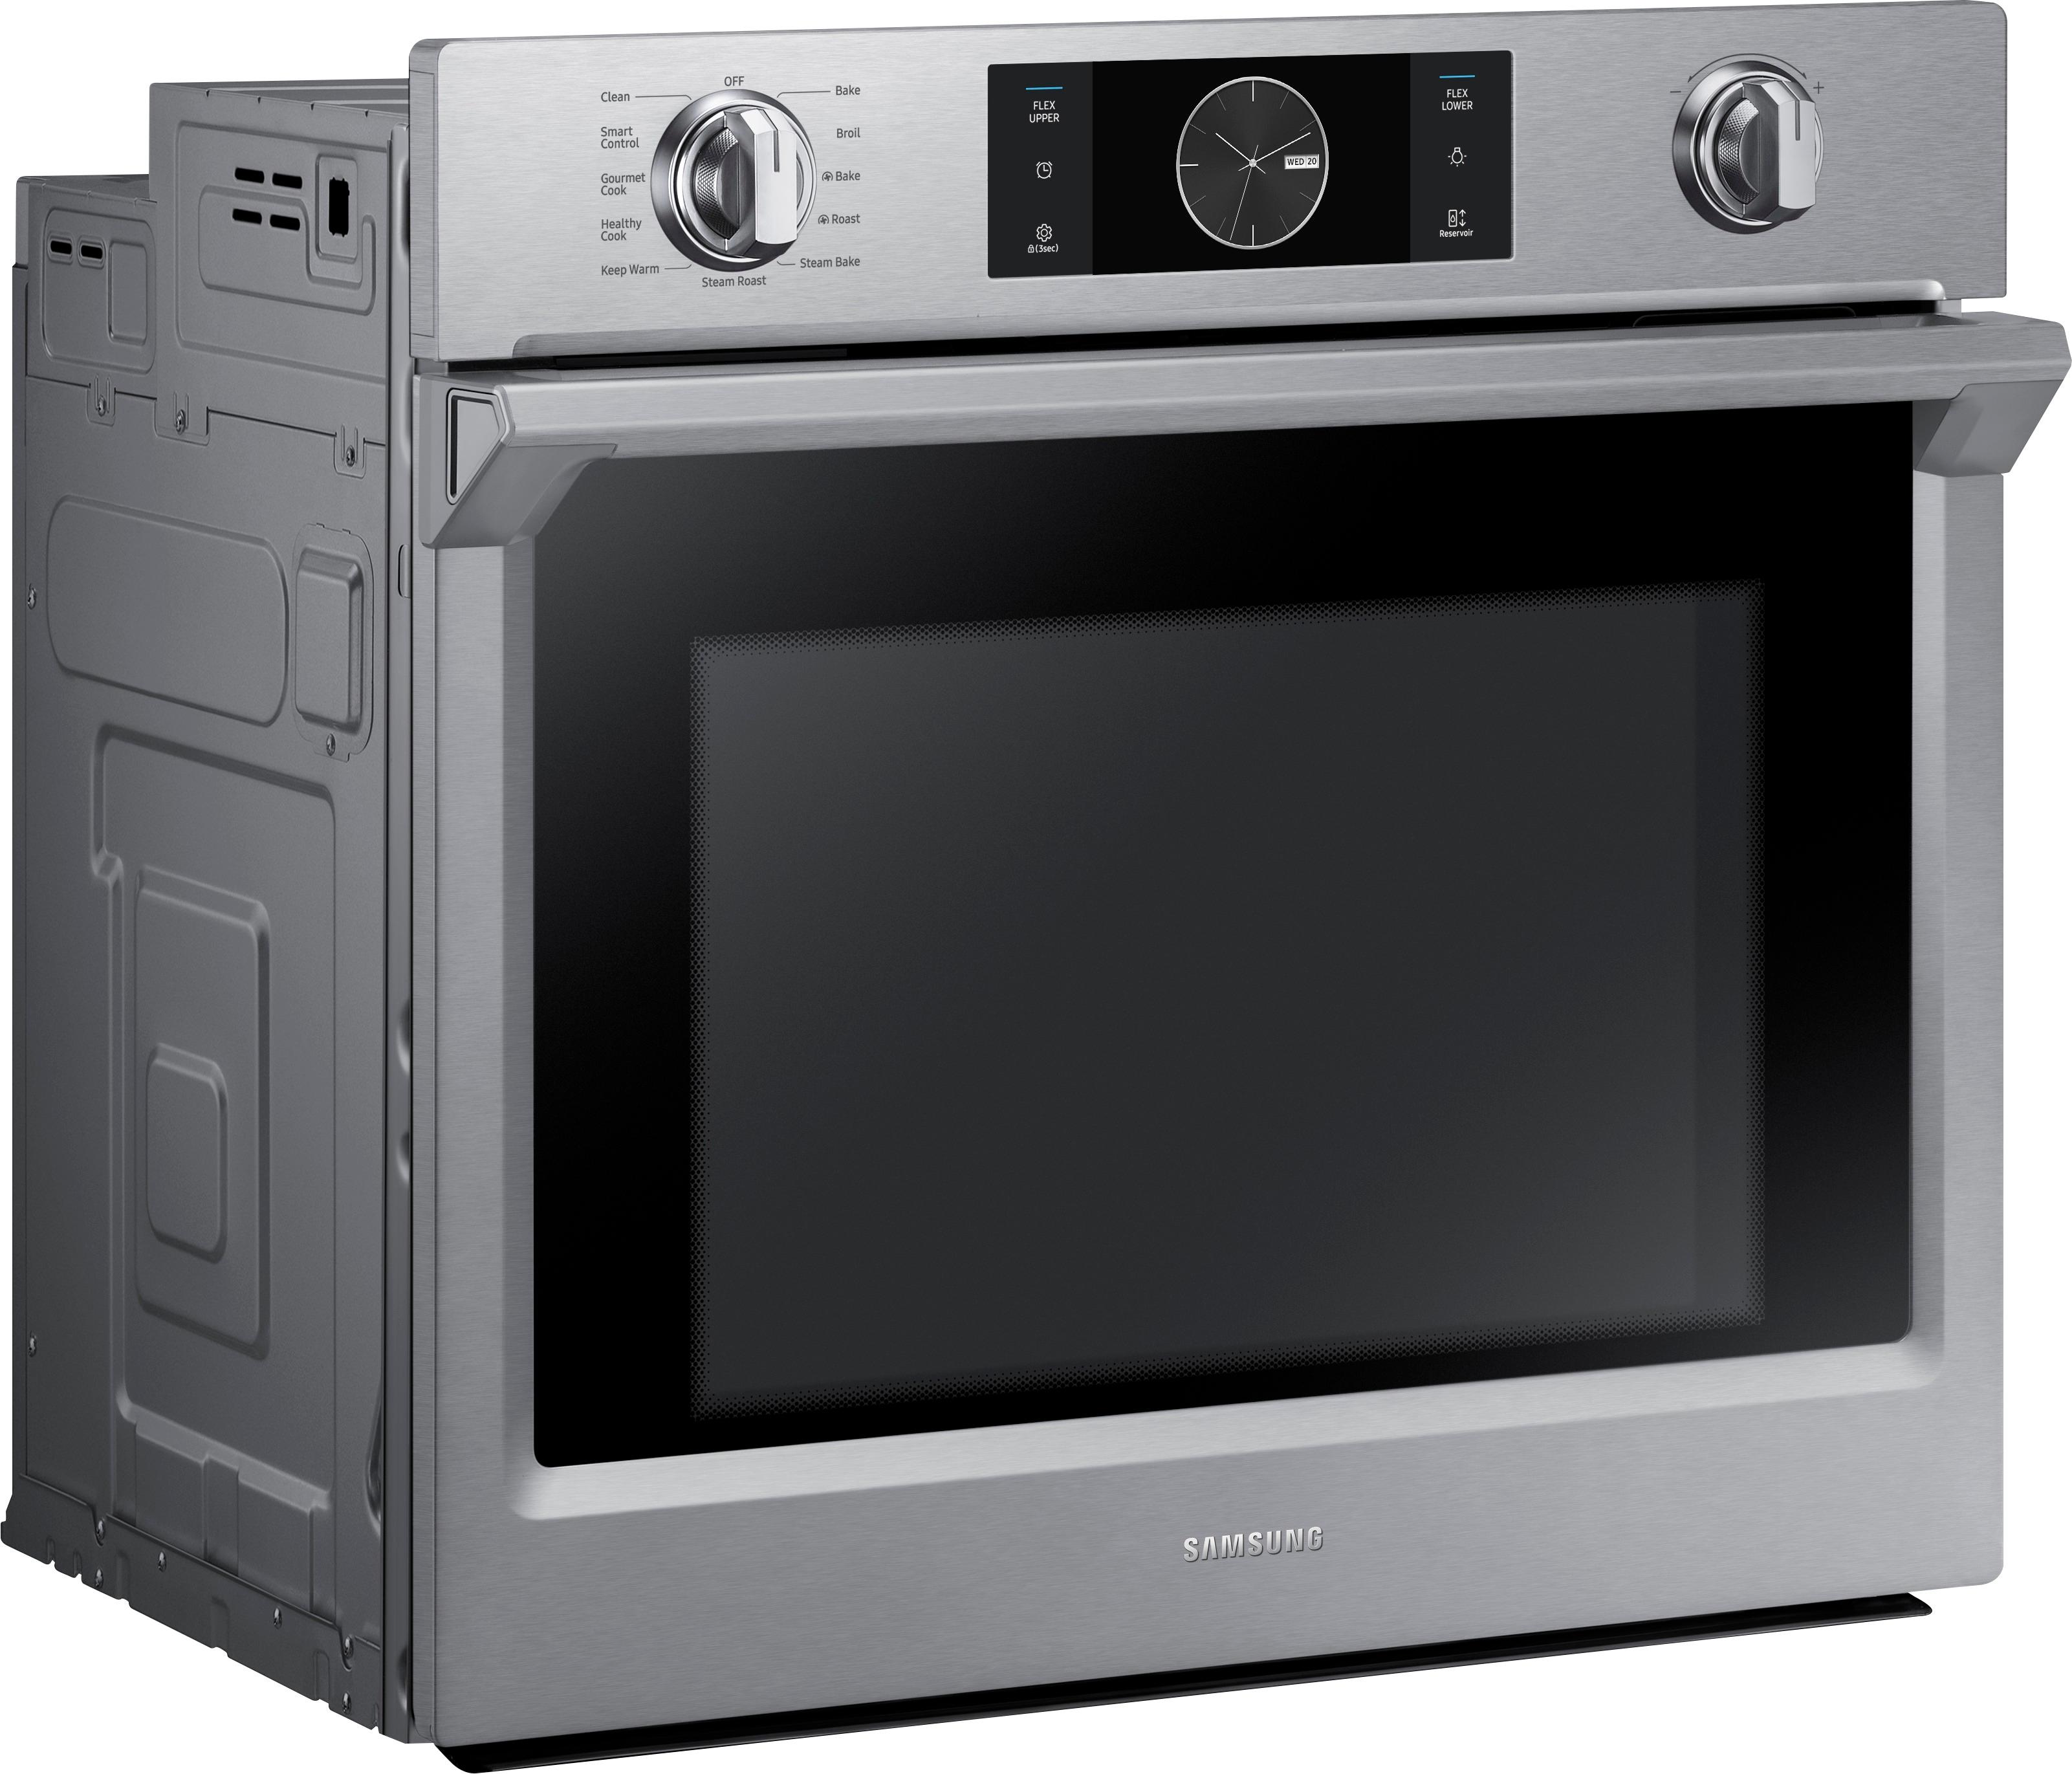 Angle View: GE - 24" Built-In Single Gas Wall Oven - White on white